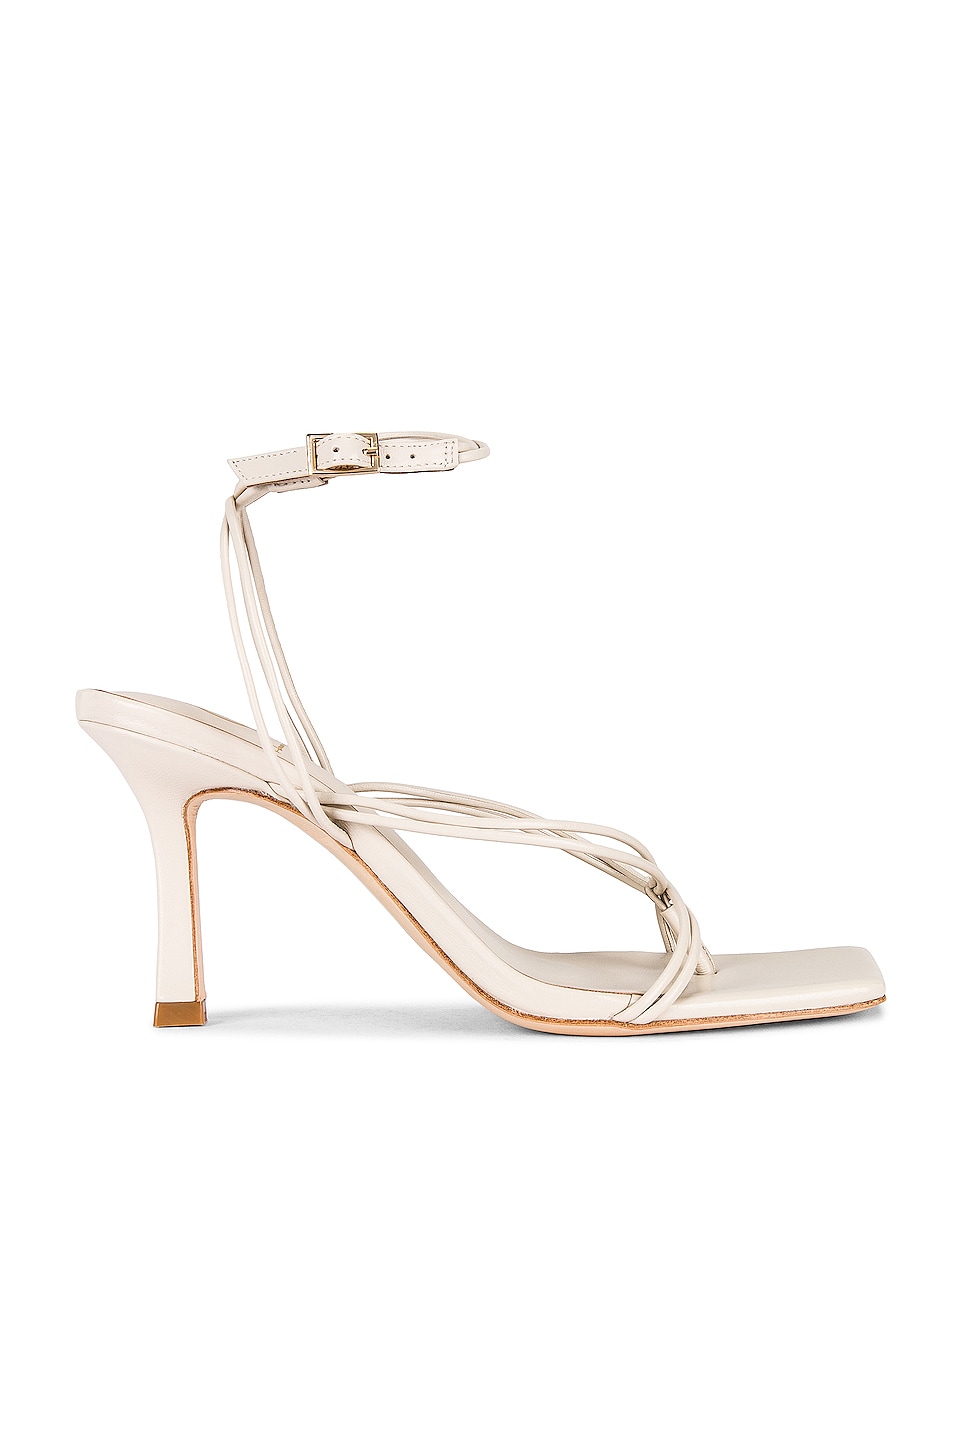 House of Harlow 1960 x REVOLVE Sol Ankle Strap in Ivory | REVOLVE